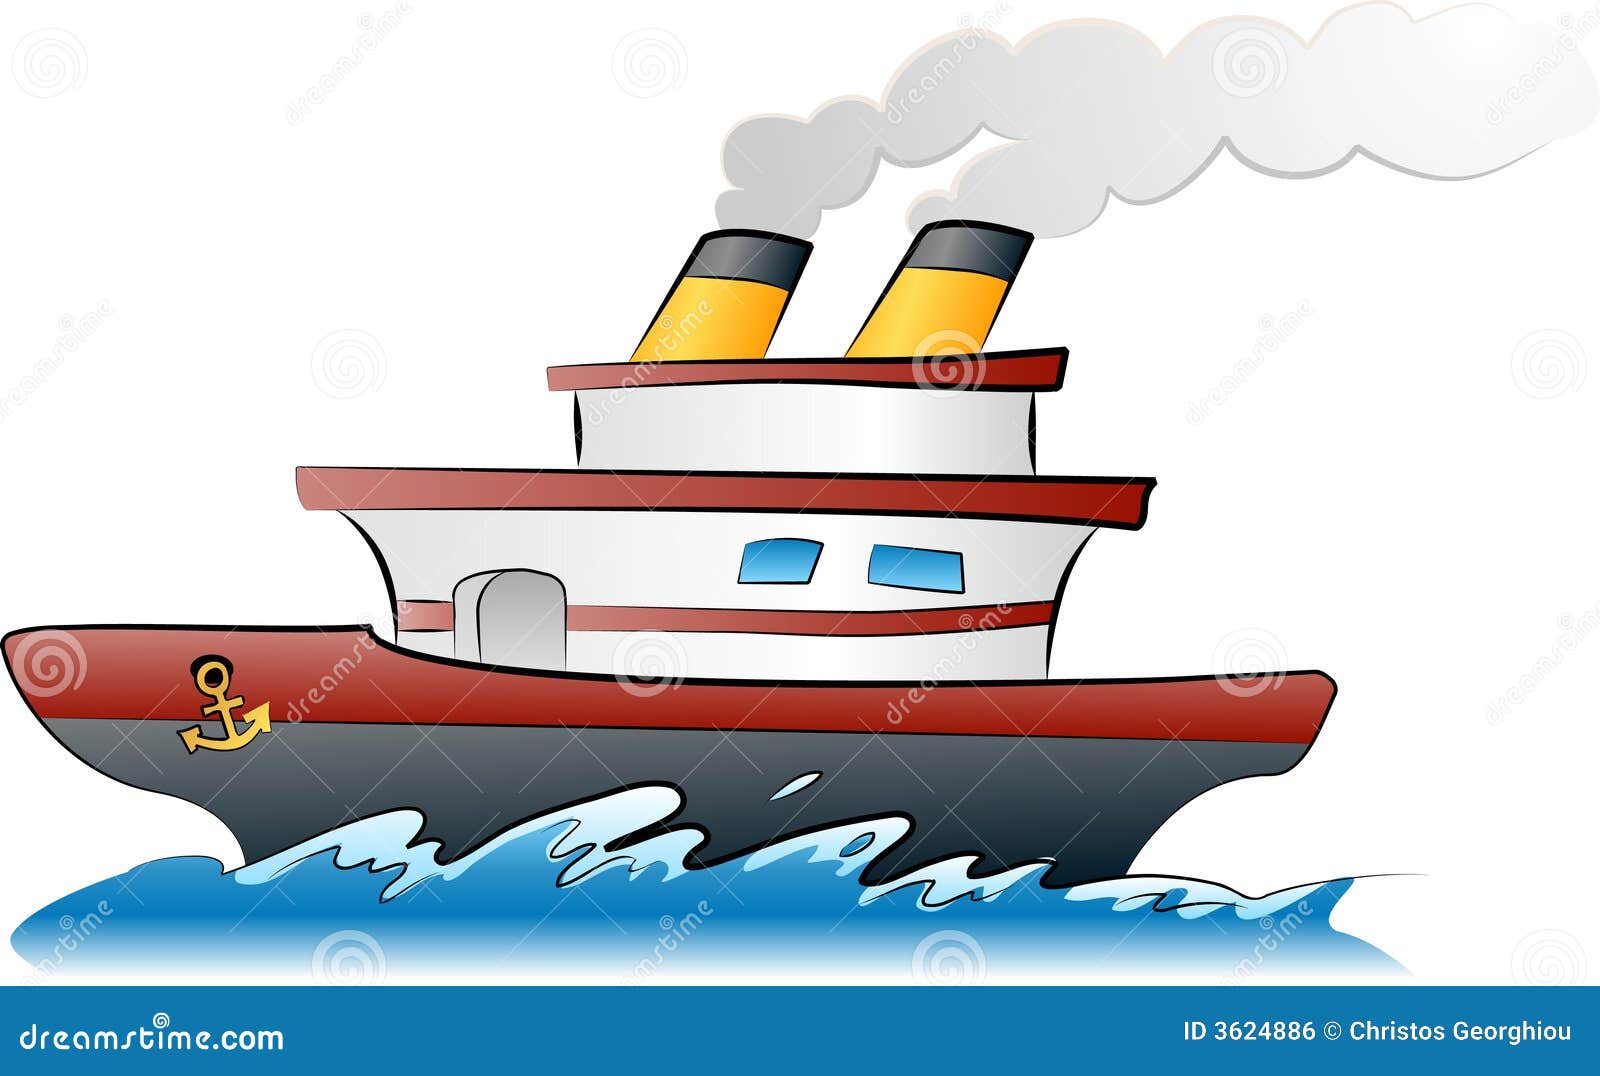 clipart ship in storm - photo #47